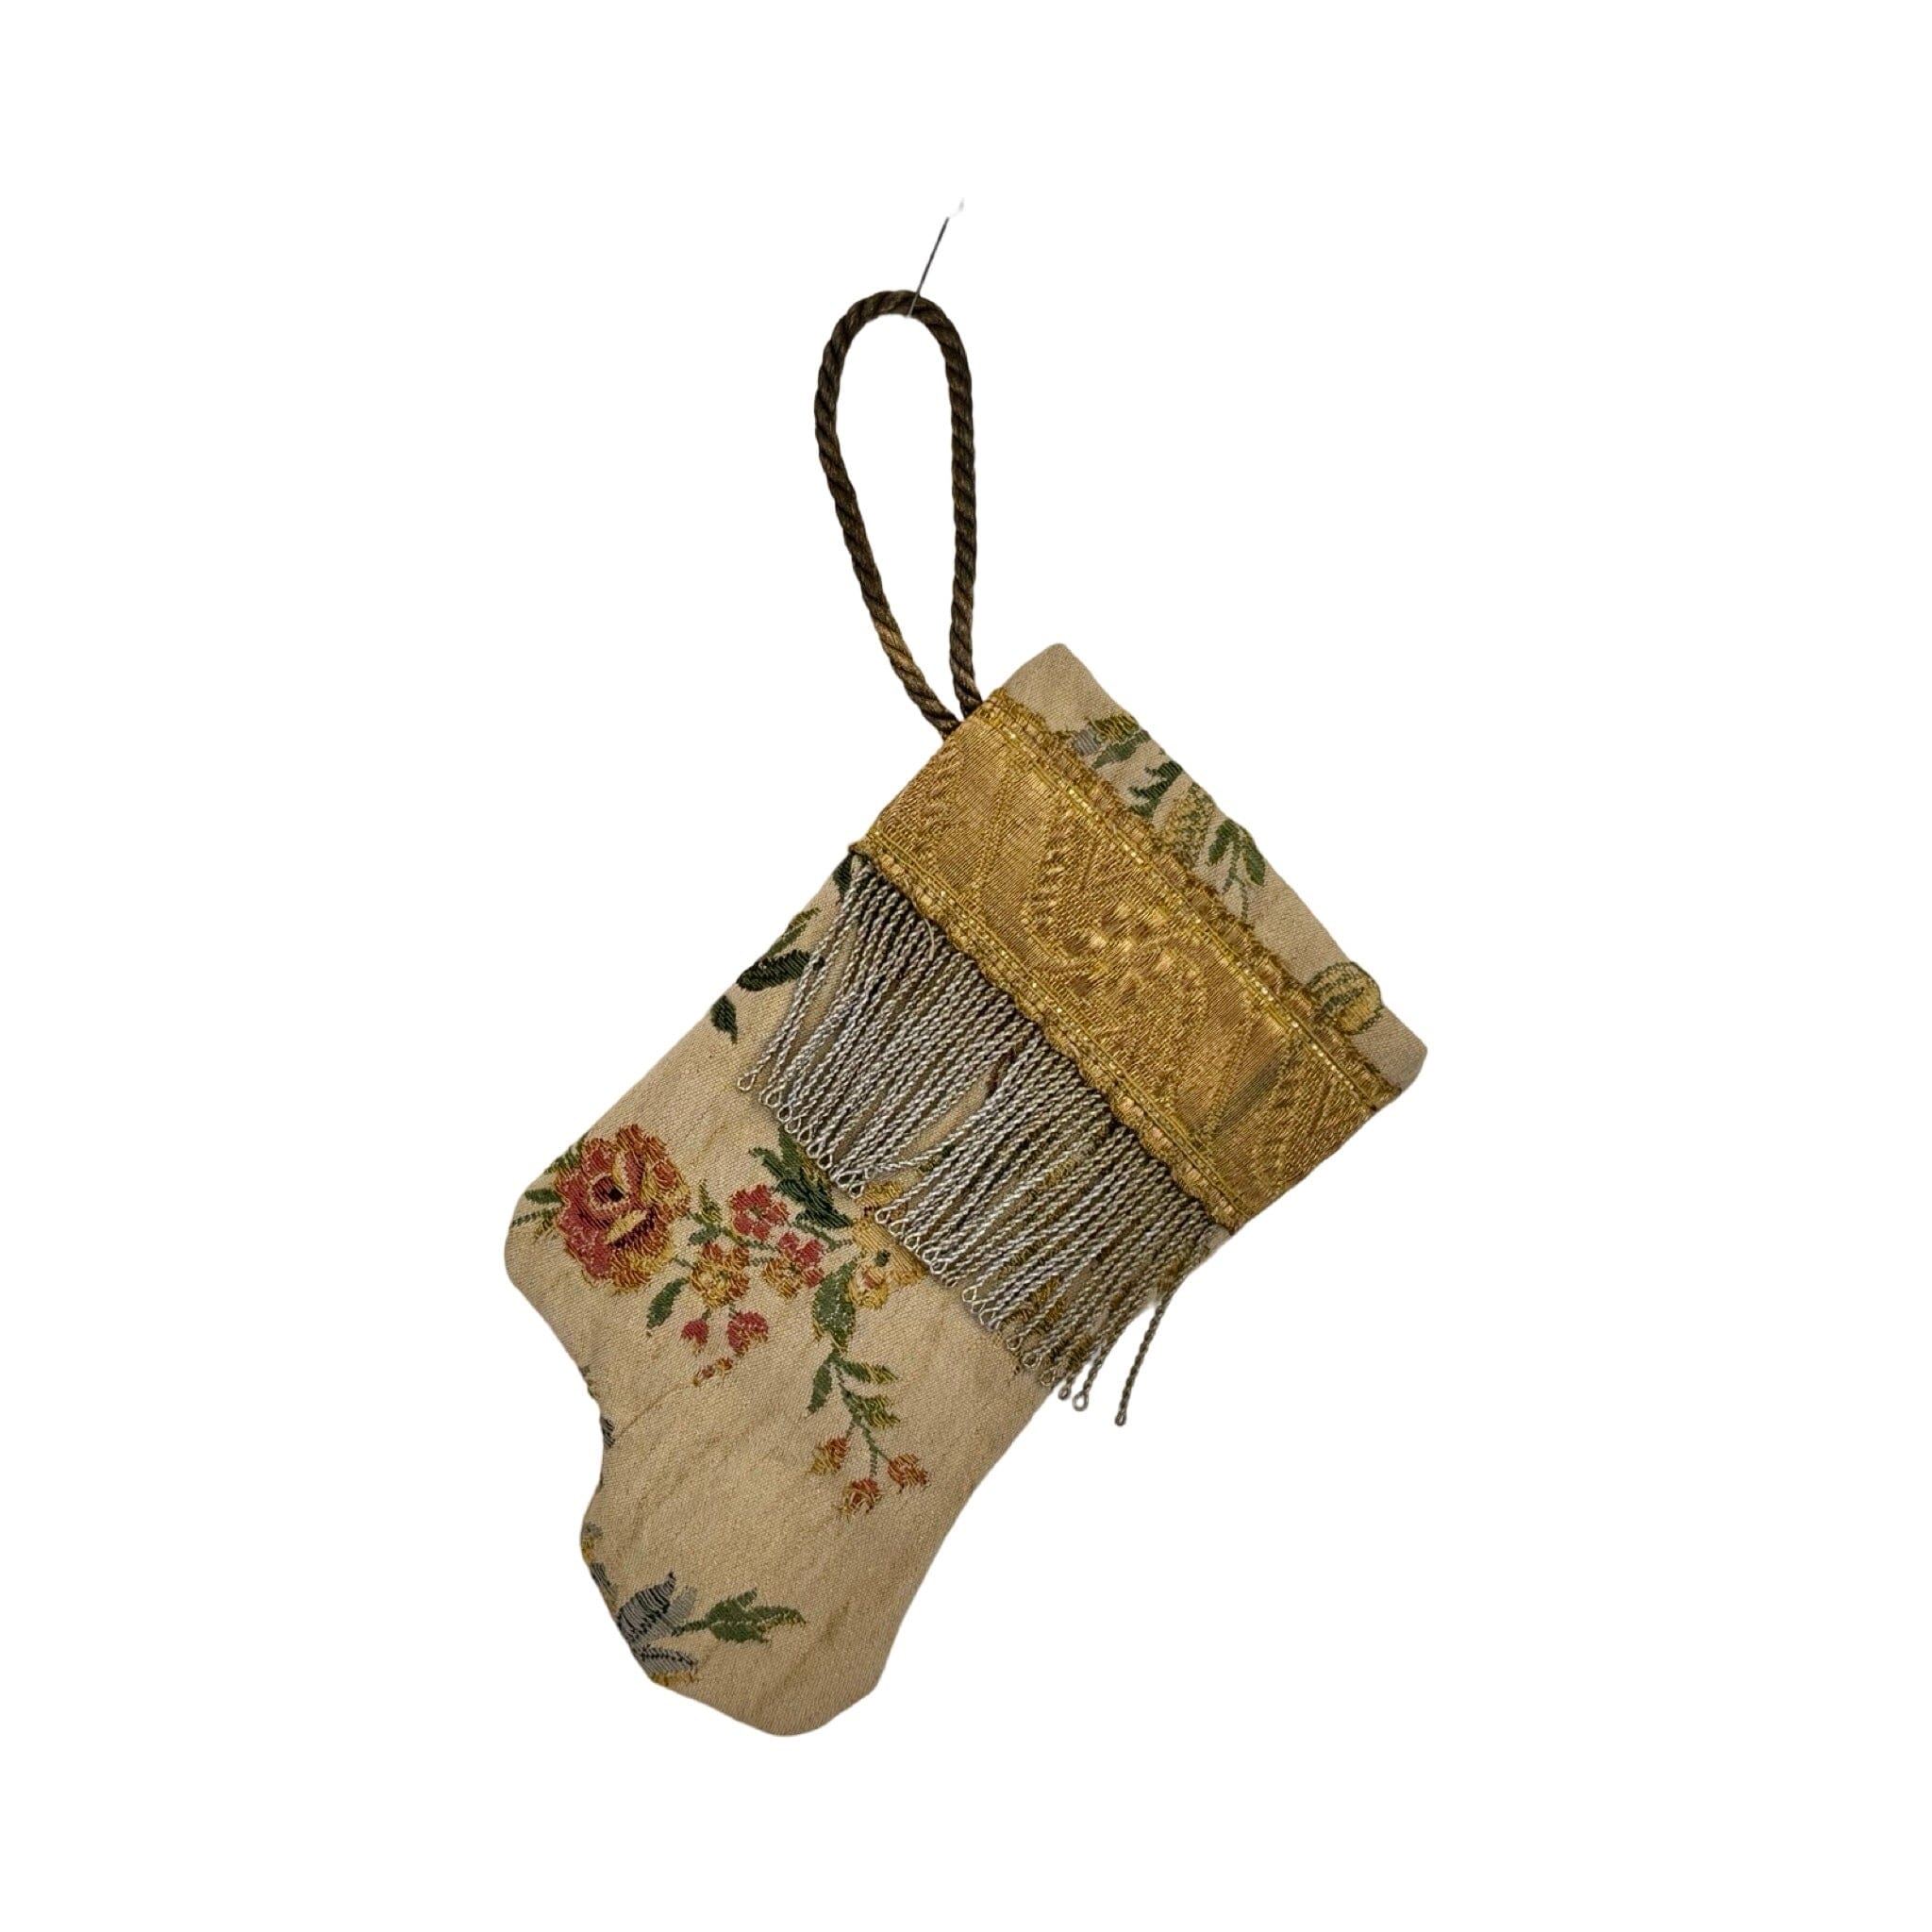 Handmade Mini Stocking Made From Vintage Fabric and Trims- Antique Sand Floral Ornament B. Viz Design G 